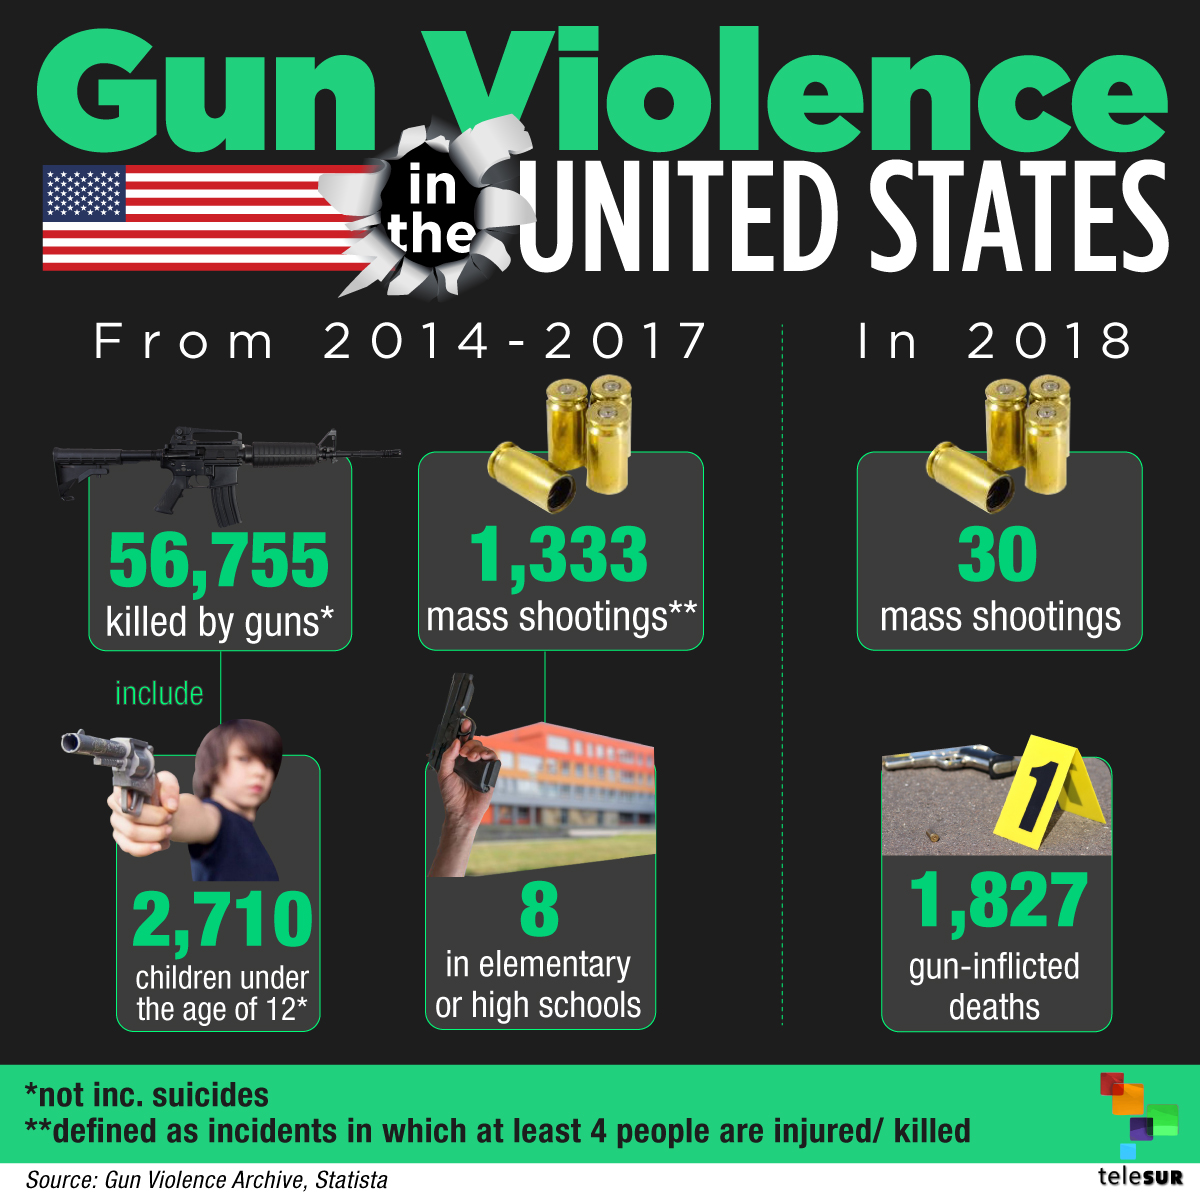 Gun Violence in the United States